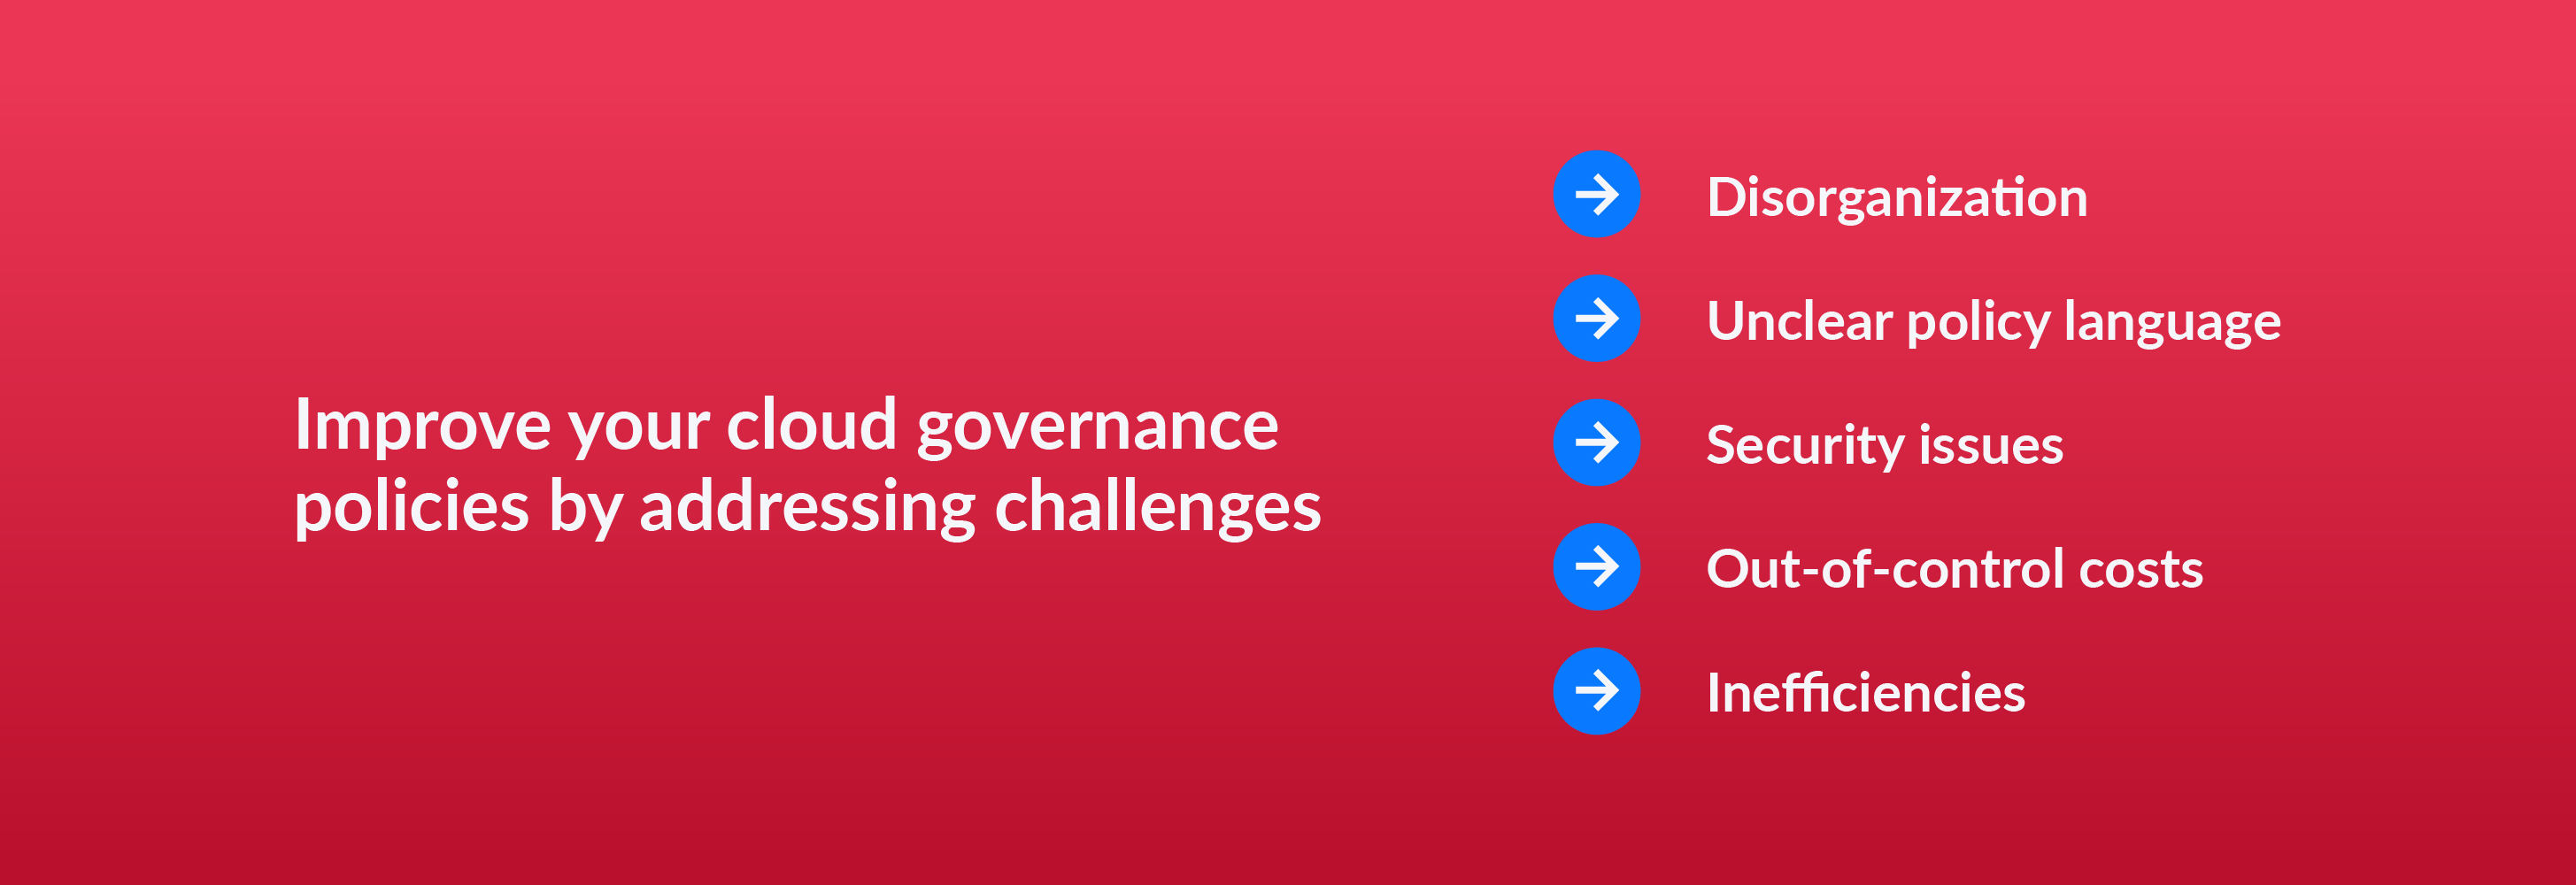 Improve you cloud governance policies by addressing challenges - disorganization, unclear policy language, security issues, out-of-control costs, inefficiencies